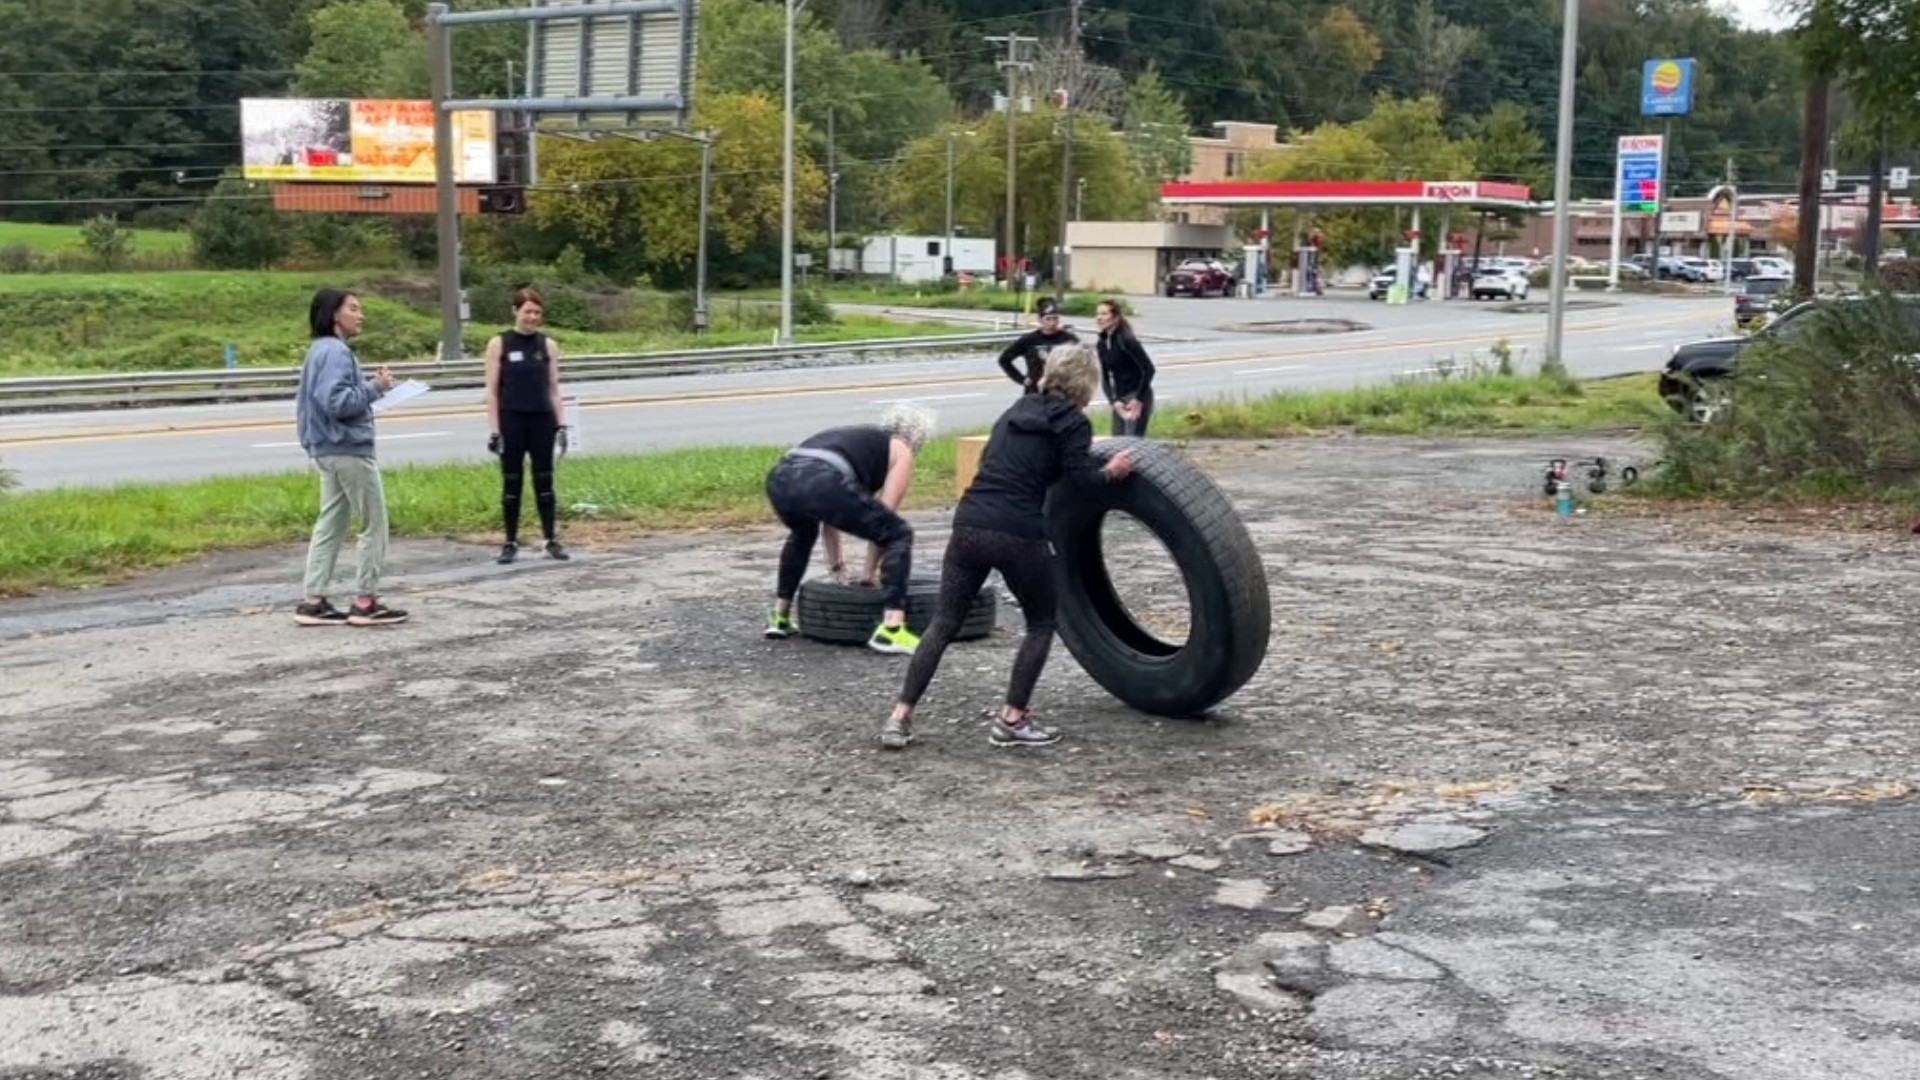 More than 100 people competed in a tough workout in Lackawanna County on Sunday, and it was all for a great cause.